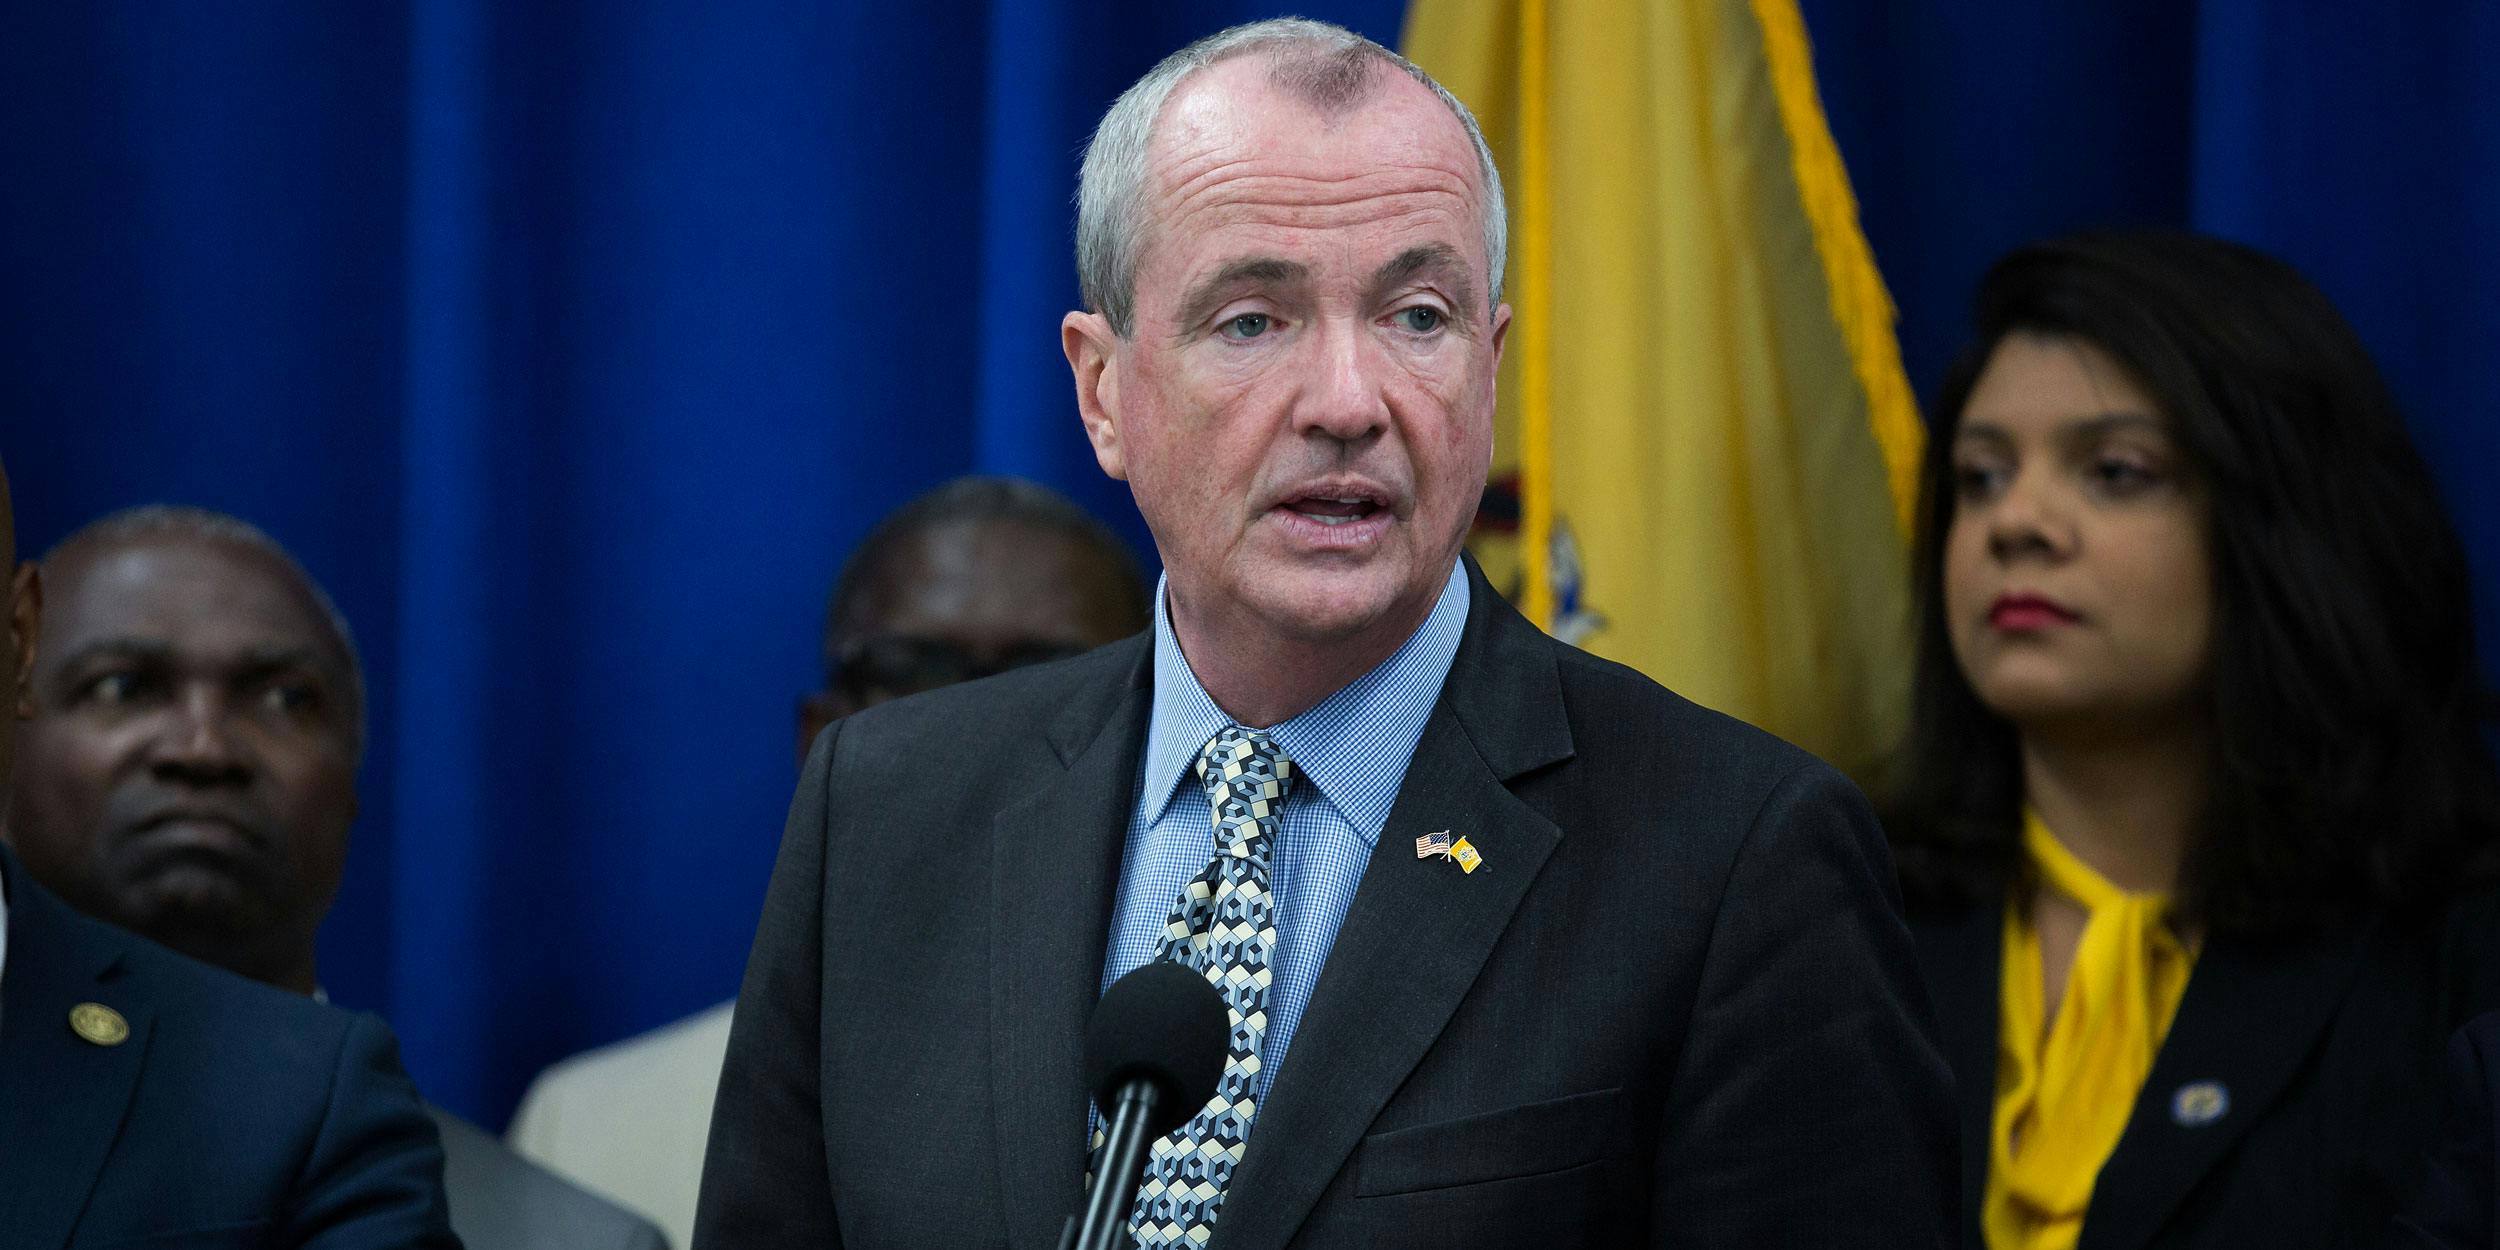 Phil Murphy, governor of New Jersey, speaks while Ras Baraka, mayor of Newark, left, listens during a budget press conference in Newark, New Jersey, U.S.